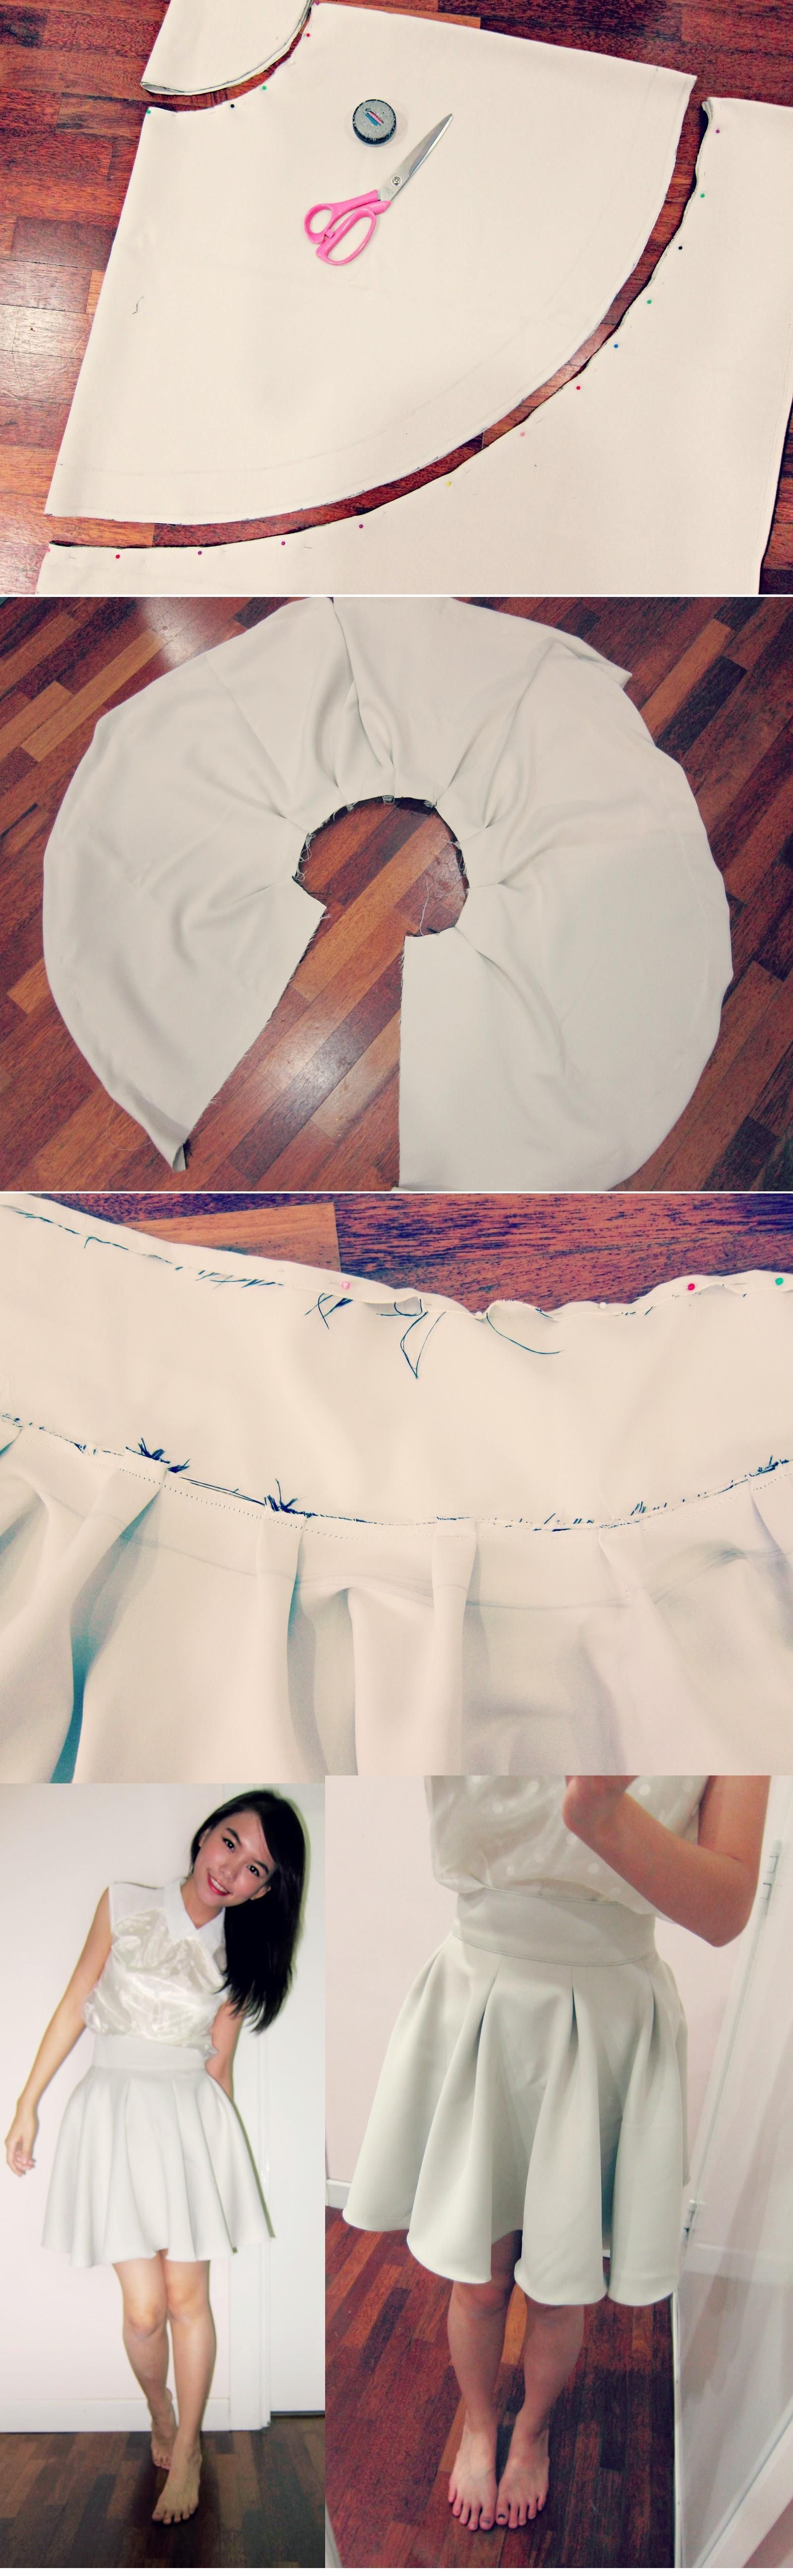 DIY Skater Skirt for if I ever get a sewing machine or even know how to sew